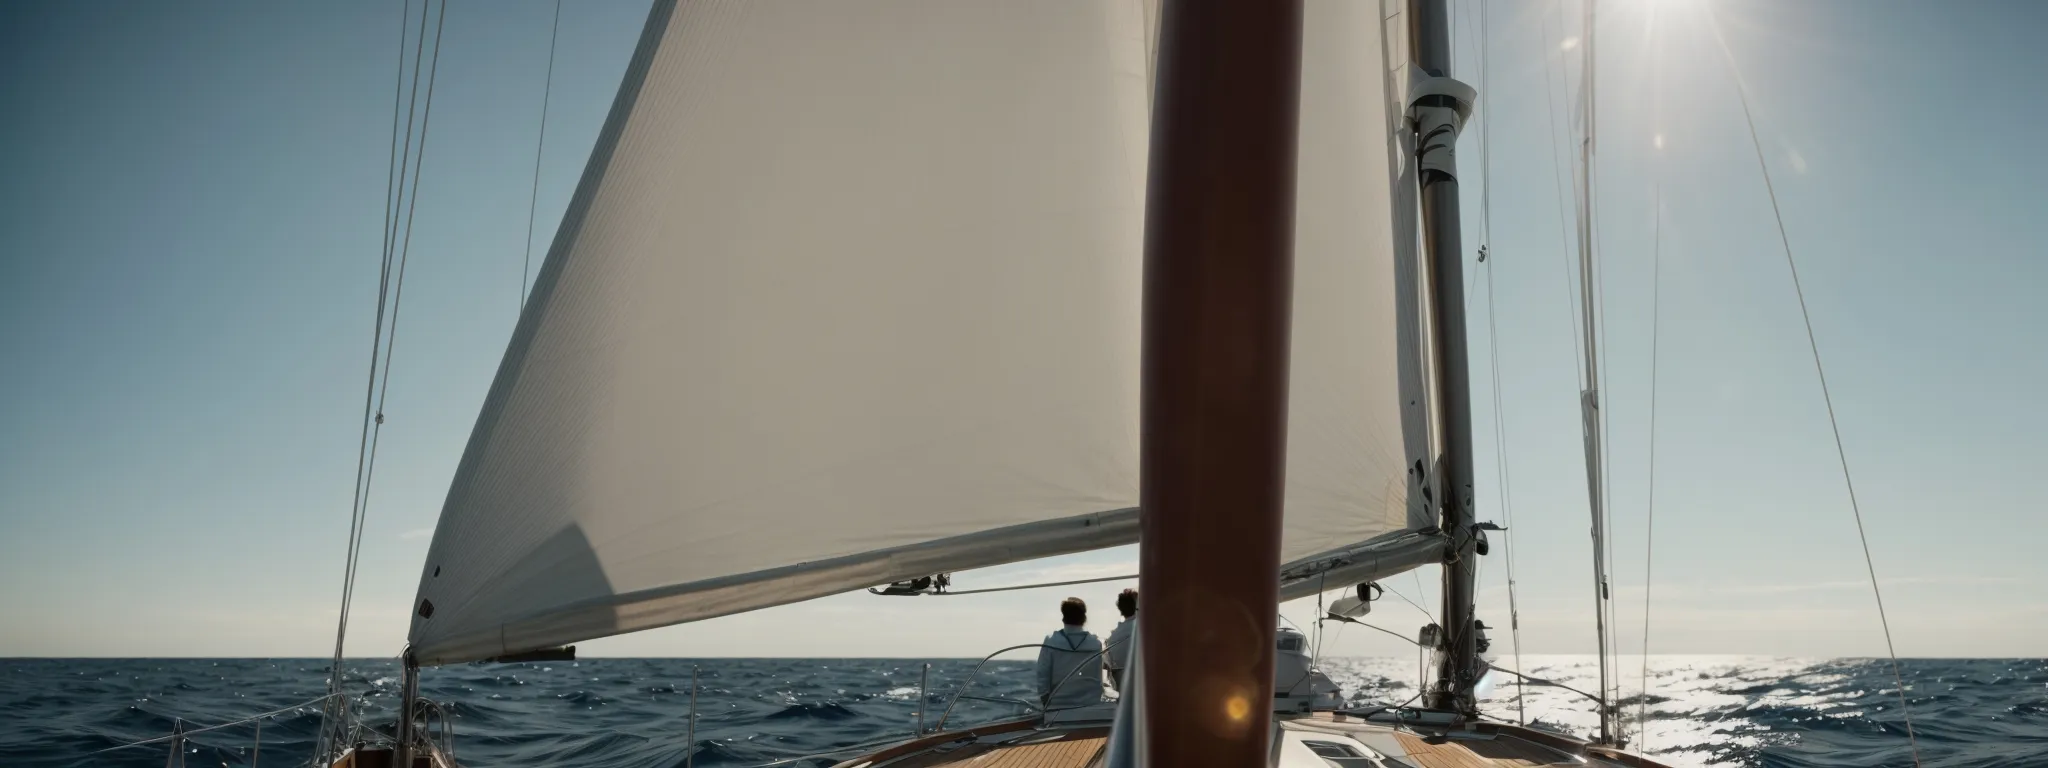 a person stands at the helm of a sailboat, navigating through a vast, open sea under a clear sky.